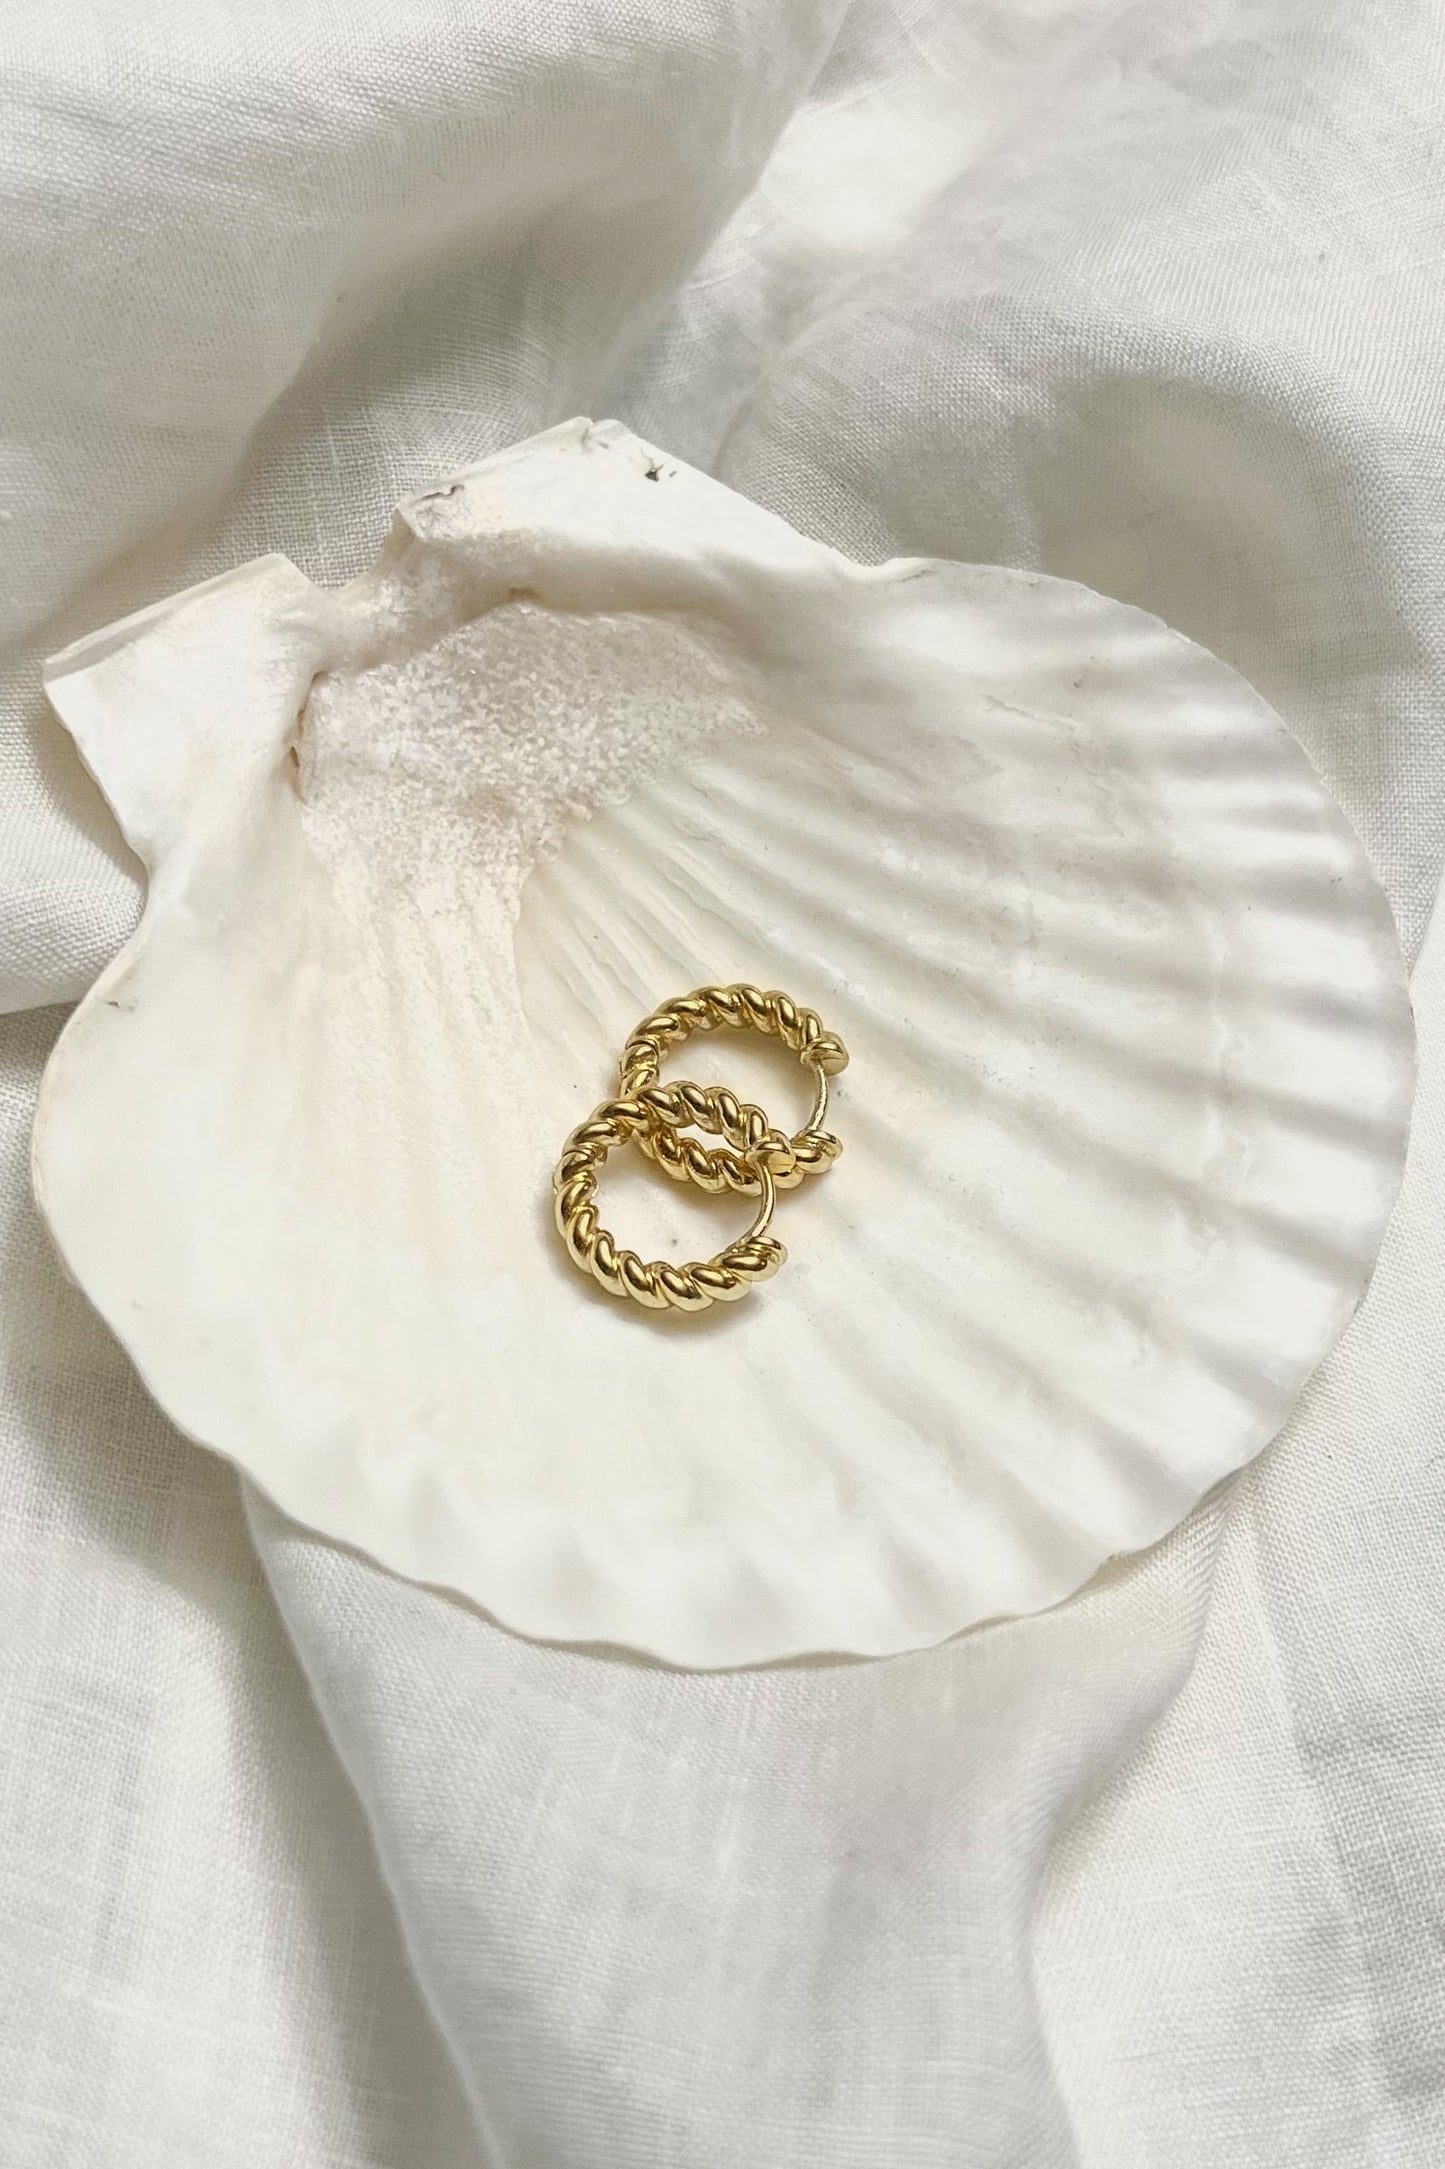 Styled photograph of the Honey crueller hoops from top view angle, placed on a white shell with flowy white linen background.